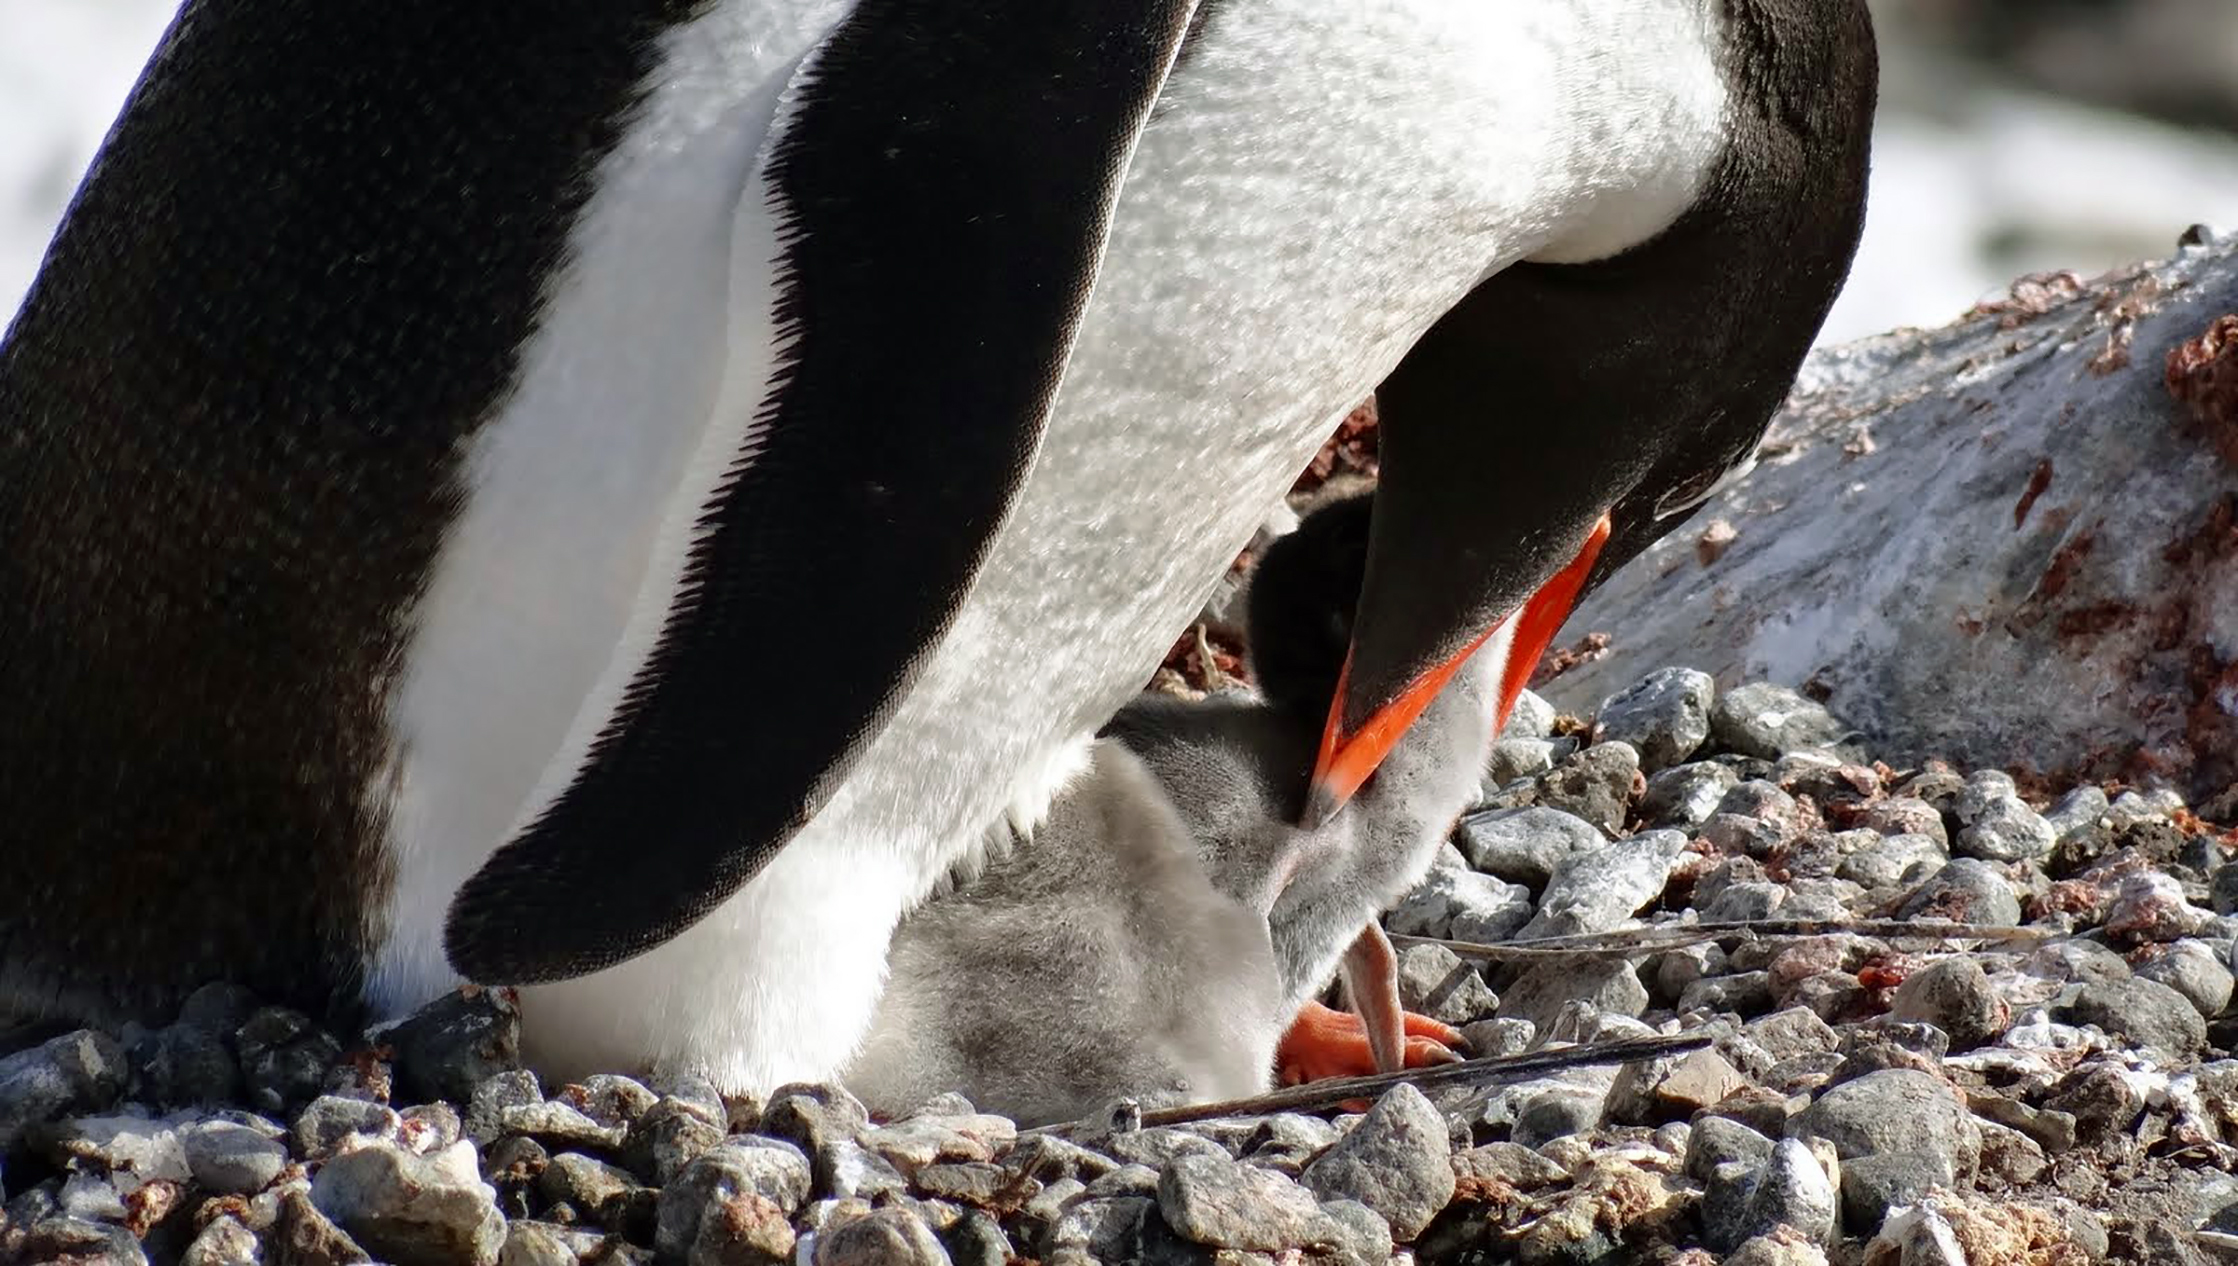 With so many nesting penguins, I was able to capture this gentoo mother feeding her chick.  Females eat more krill than do males in order to properly nourish their chicks.